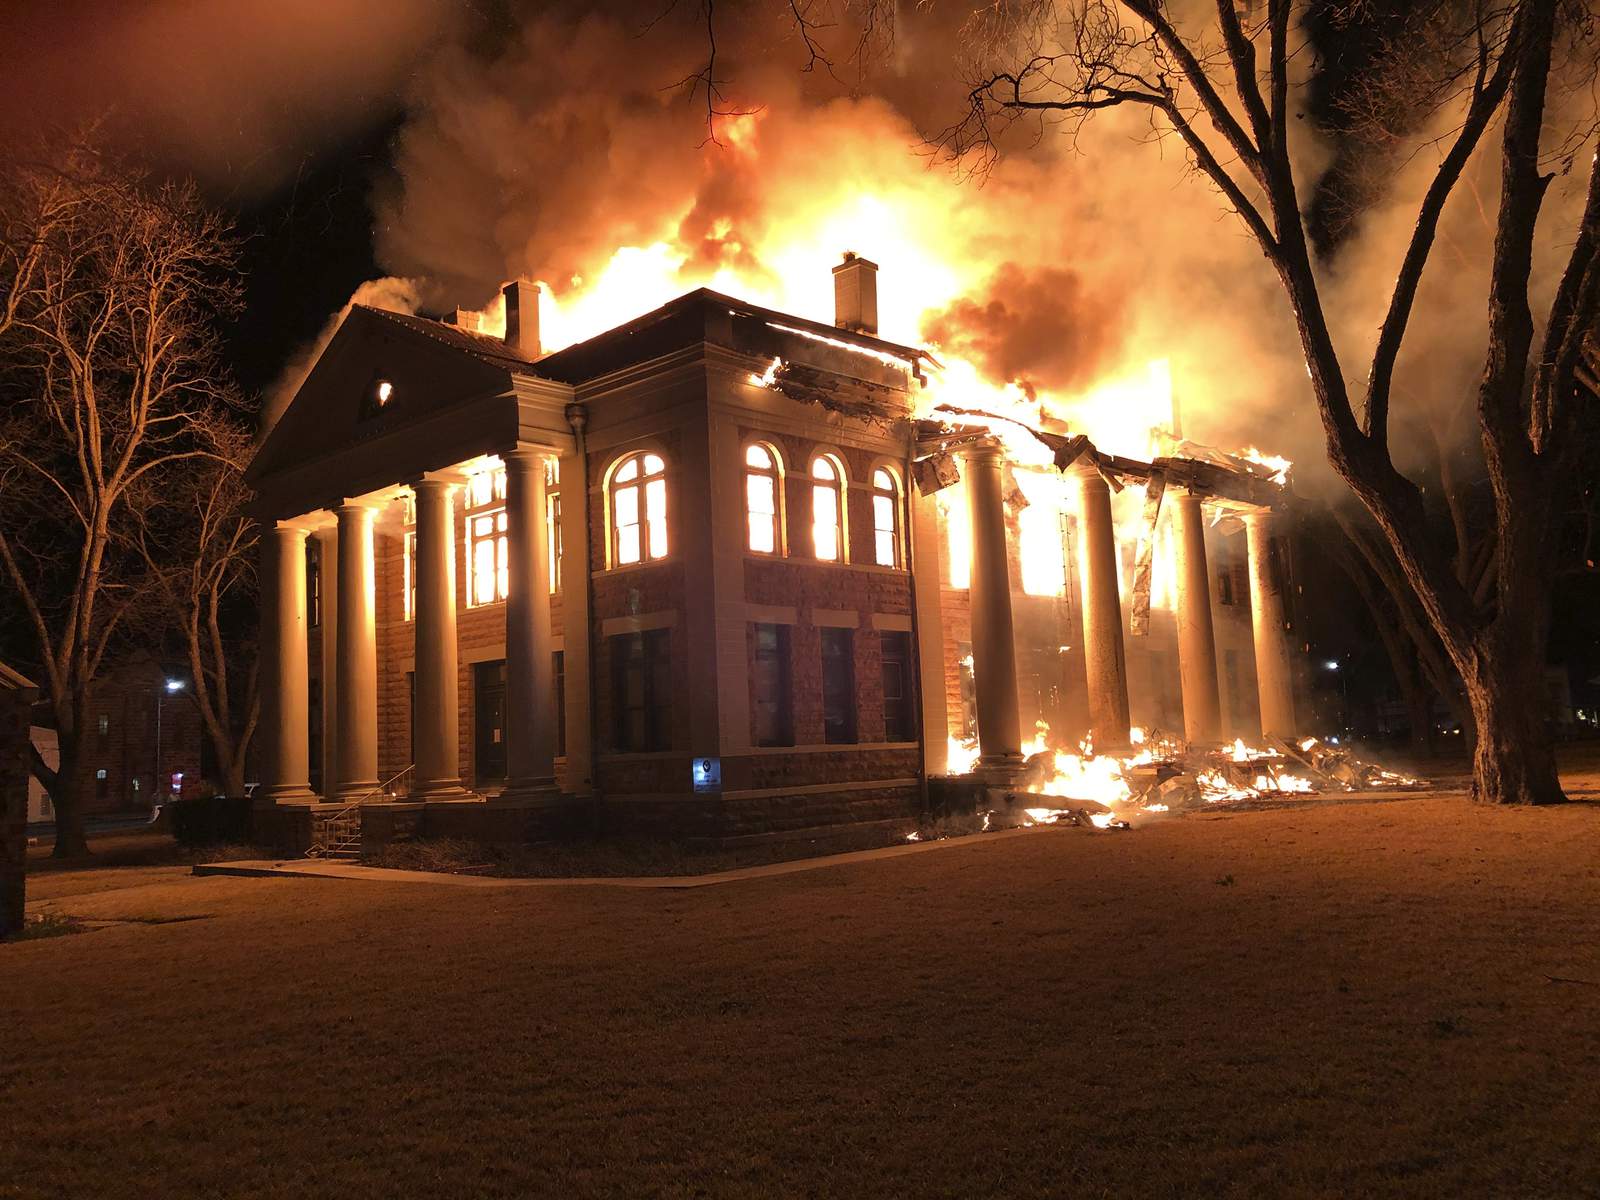 Arson suspected in massive fire at Texas courthouse